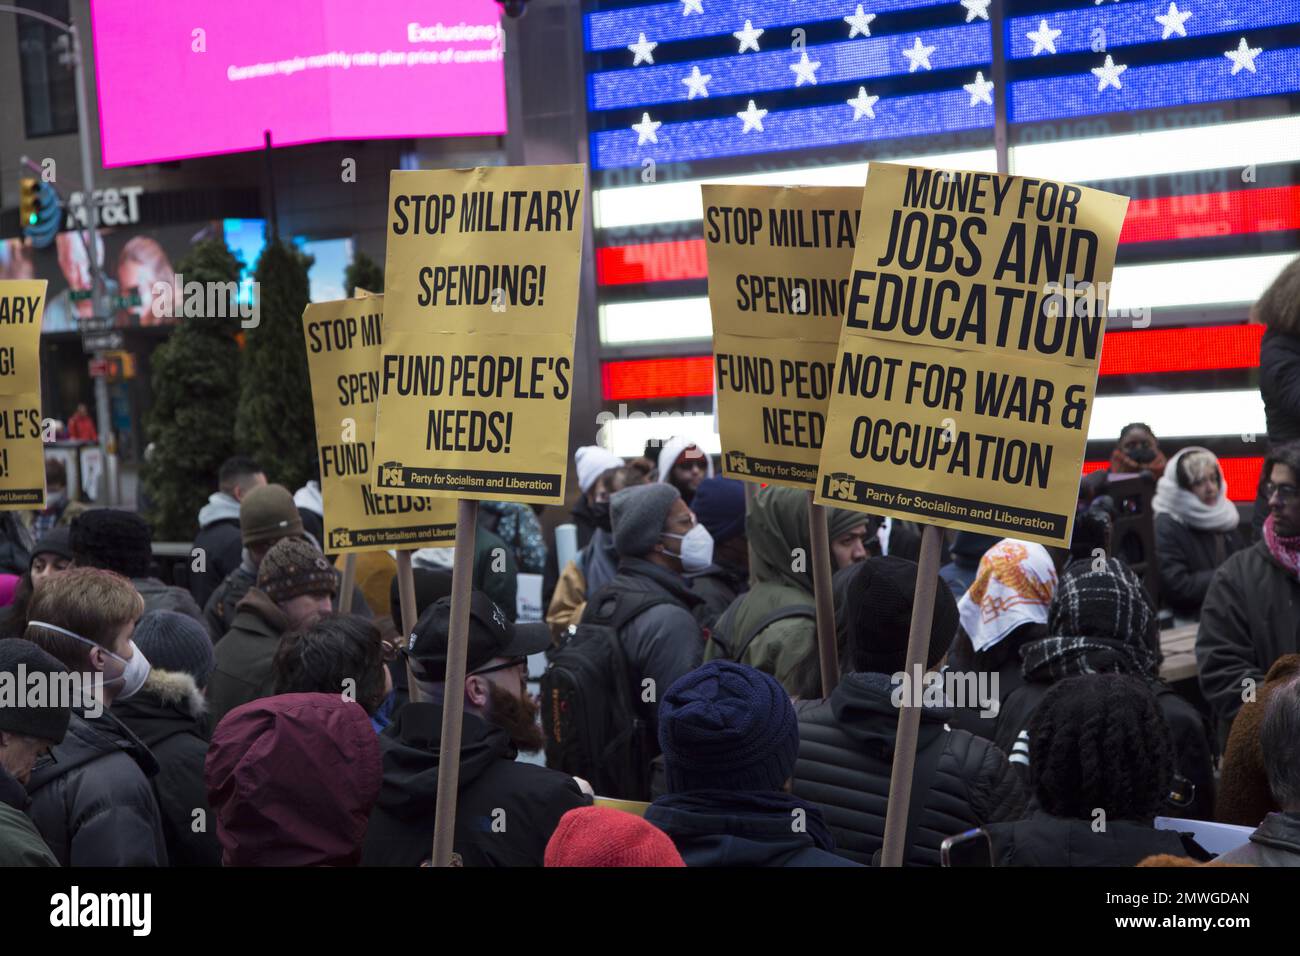 Peace activists and anti-militarists looking for negotiations in Ukraine rather than NATO escelating the war rally in Times Square in New York CIty during Martin Luther King Day weekend. Stock Photo